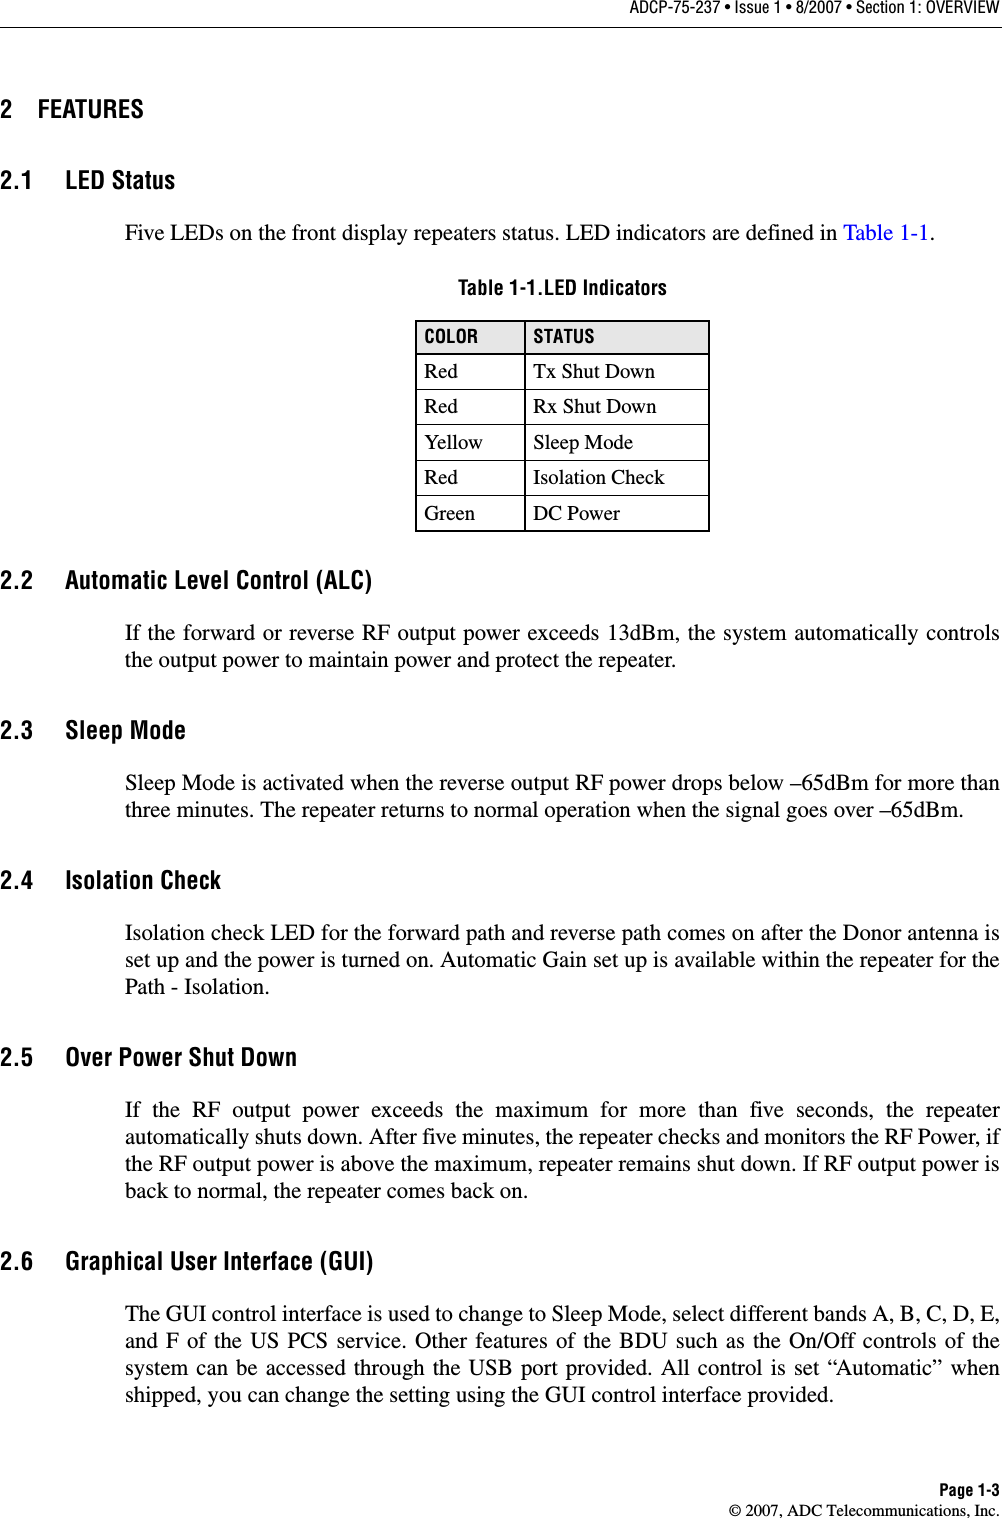 ADCP-75-237 • Issue 1 • 8/2007 • Section 1: OVERVIEWPage 1-3© 2007, ADC Telecommunications, Inc.2 FEATURES2.1 LED StatusFive LEDs on the front display repeaters status. LED indicators are defined in Table 1-1.Table 1-1.LED IndicatorsCOLOR STATUSRed Tx Shut DownRed Rx Shut DownYellow Sleep ModeRed Isolation CheckGreen DC Power2.2 Automatic Level Control (ALC)If the forward or reverse RF output power exceeds 13dBm, the system automatically controls the output power to maintain power and protect the repeater.2.3 Sleep ModeSleep Mode is activated when the reverse output RF power drops below –65dBm for more than three minutes. The repeater returns to normal operation when the signal goes over –65dBm.2.4 Isolation CheckIsolation check LED for the forward path and reverse path comes on after the Donor antenna is set up and the power is turned on. Automatic Gain set up is available within the repeater for the Path - Isolation.2.5 Over Power Shut DownIf the RF output power exceeds the maximum for more than five seconds, the repeater automatically shuts down. After five minutes, the repeater checks and monitors the RF Power, if the RF output power is above the maximum, repeater remains shut down. If RF output power is back to normal, the repeater comes back on.2.6 Graphical User Interface (GUI)The GUI control interface is used to change to Sleep Mode, select different bands A, B, C, D, E, and F of the US PCS service. Other features of the BDU such as the On/Off controls of the system can be accessed through the USB port provided. All control is set “Automatic” when shipped, you can change the setting using the GUI control interface provided.